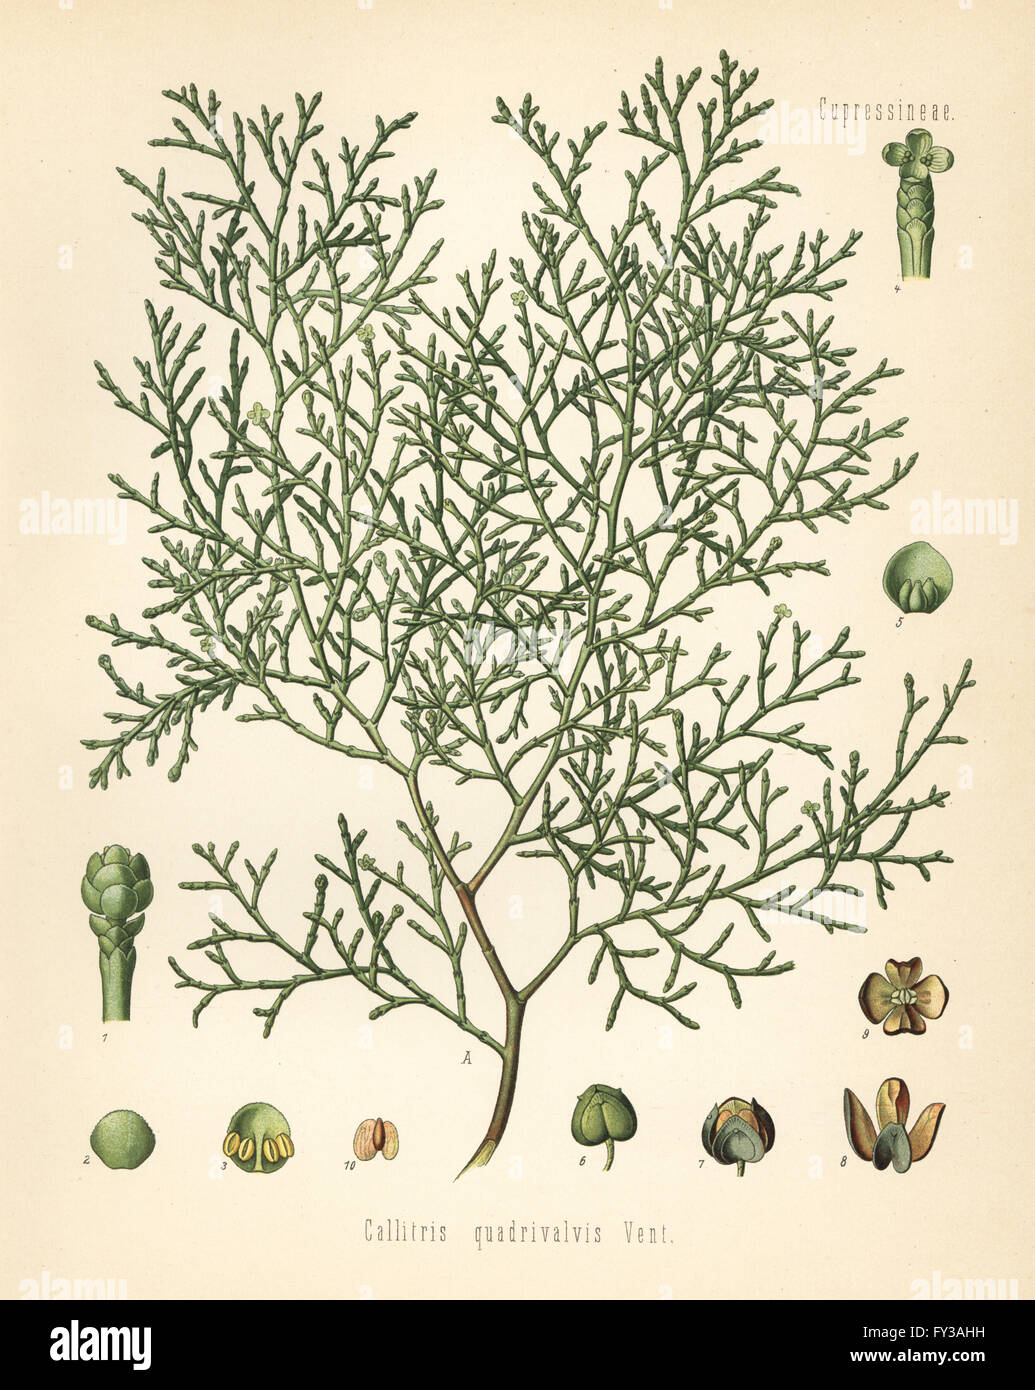 Sandarac tree, Tetraclinis articulata (Callitris quadrivalvis). Chromolithograph after a botanical illustration by Walther Muller from Hermann Adolph Koehler's Medicinal Plants, edited by Gustav Pabst, Koehler, Germany, 1887. Stock Photo